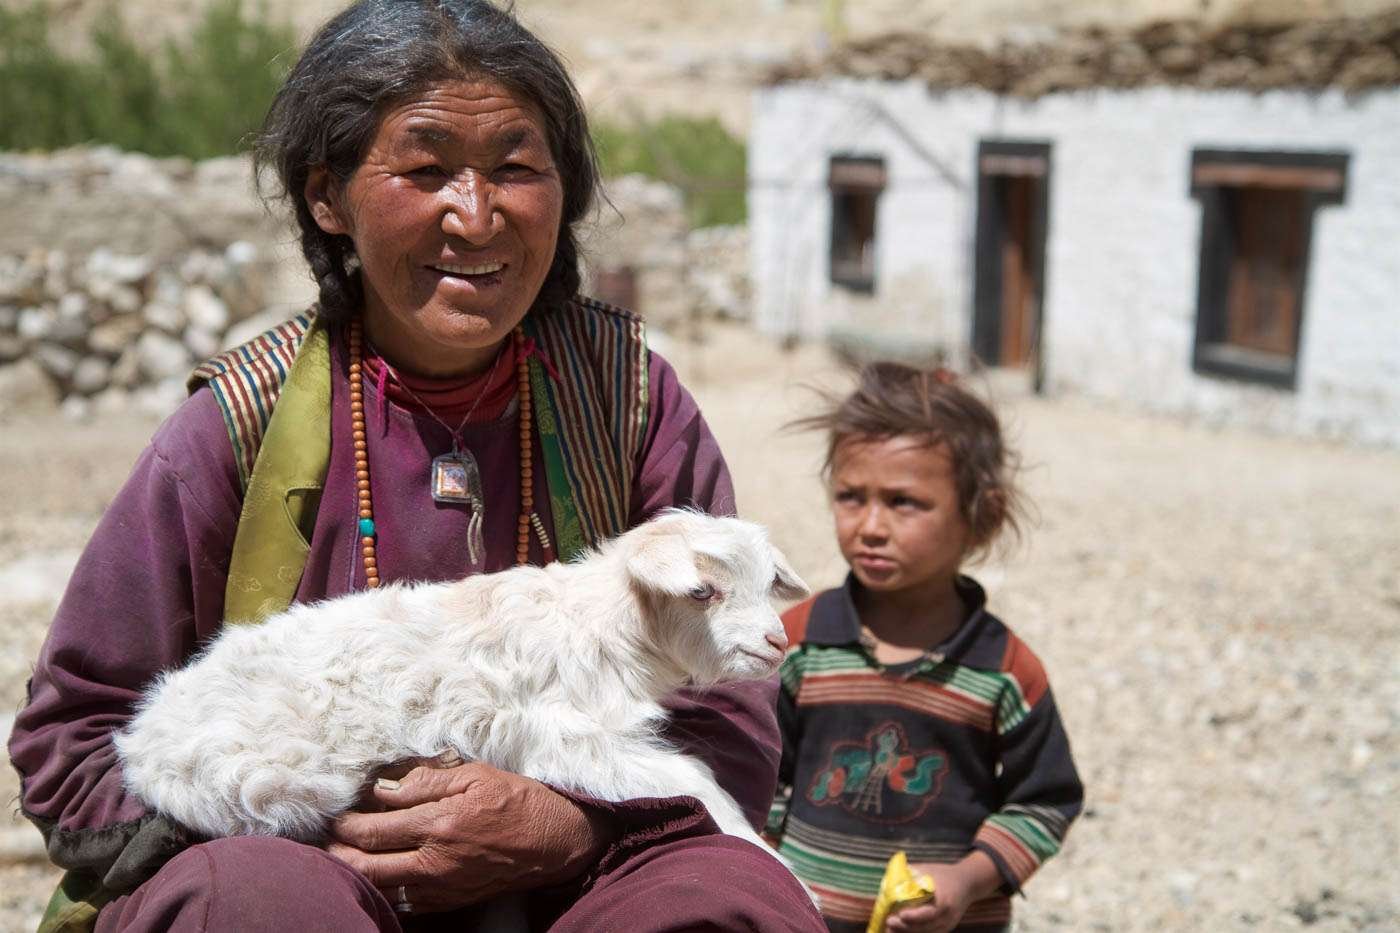 Ladakh photography tour: people and culture photo